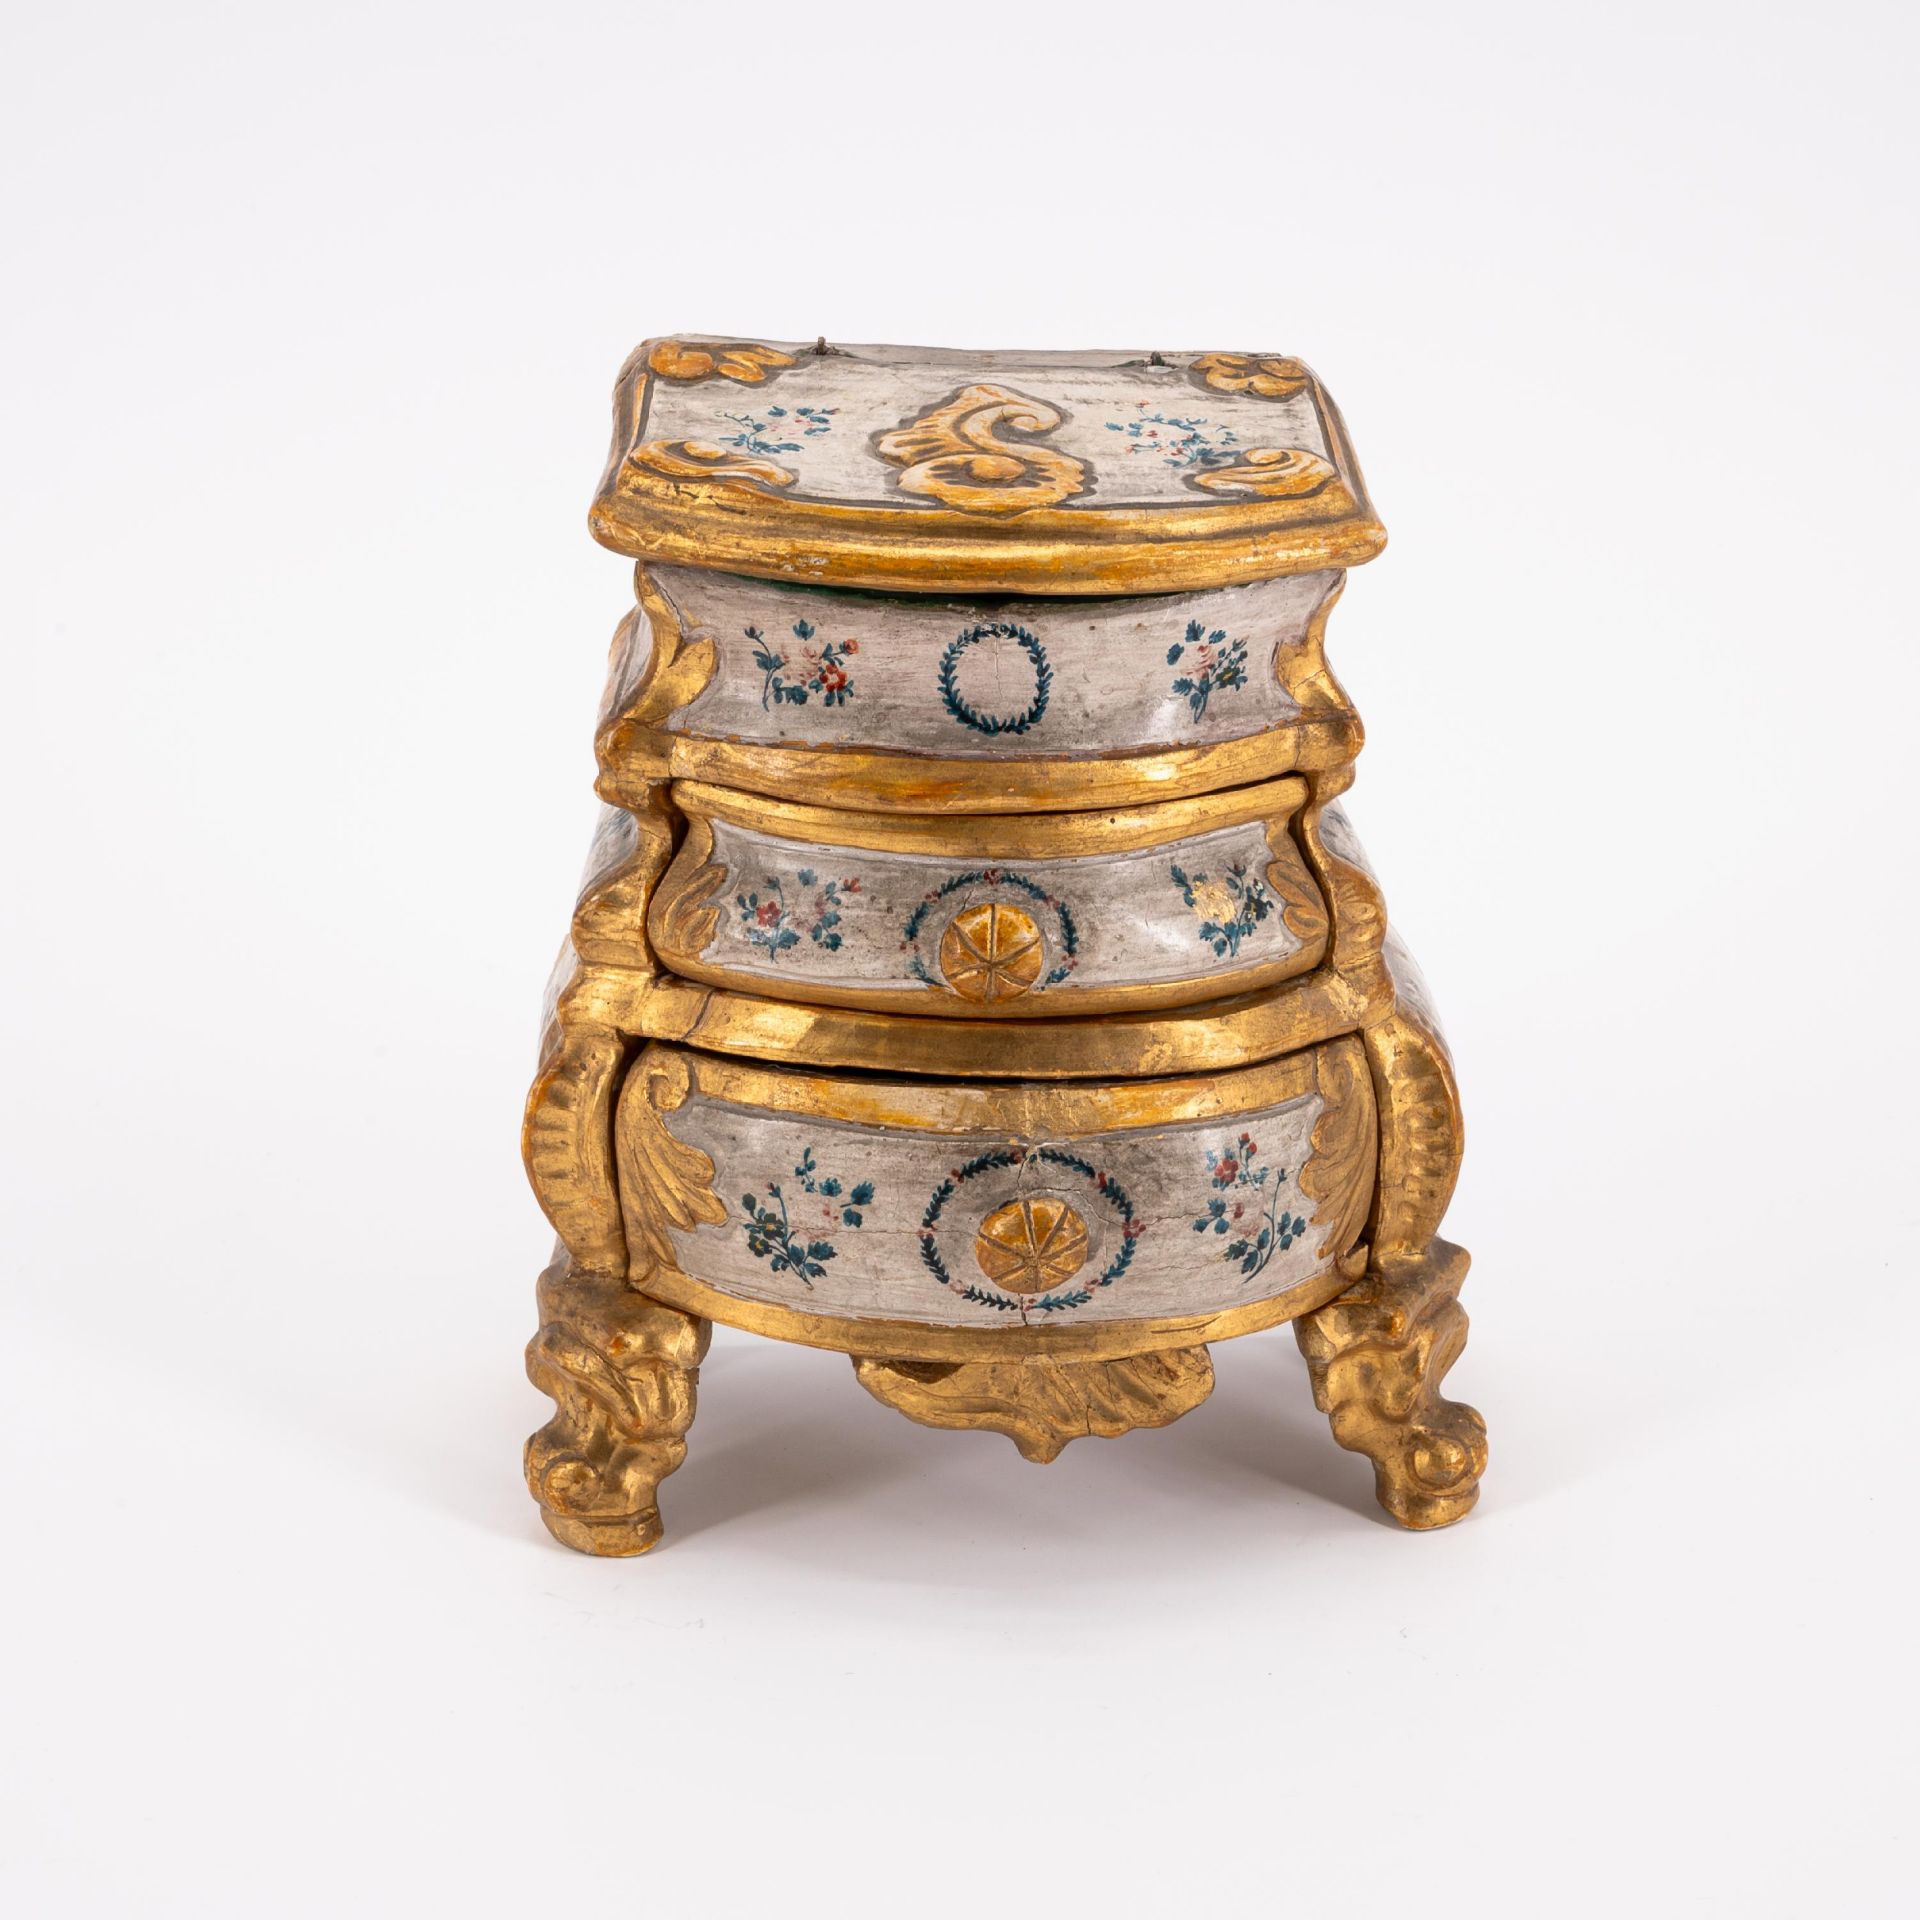 POLYCHROMED WOODEN MINIATURE ROCOCO CHEST OF DRAWERS - Image 2 of 7